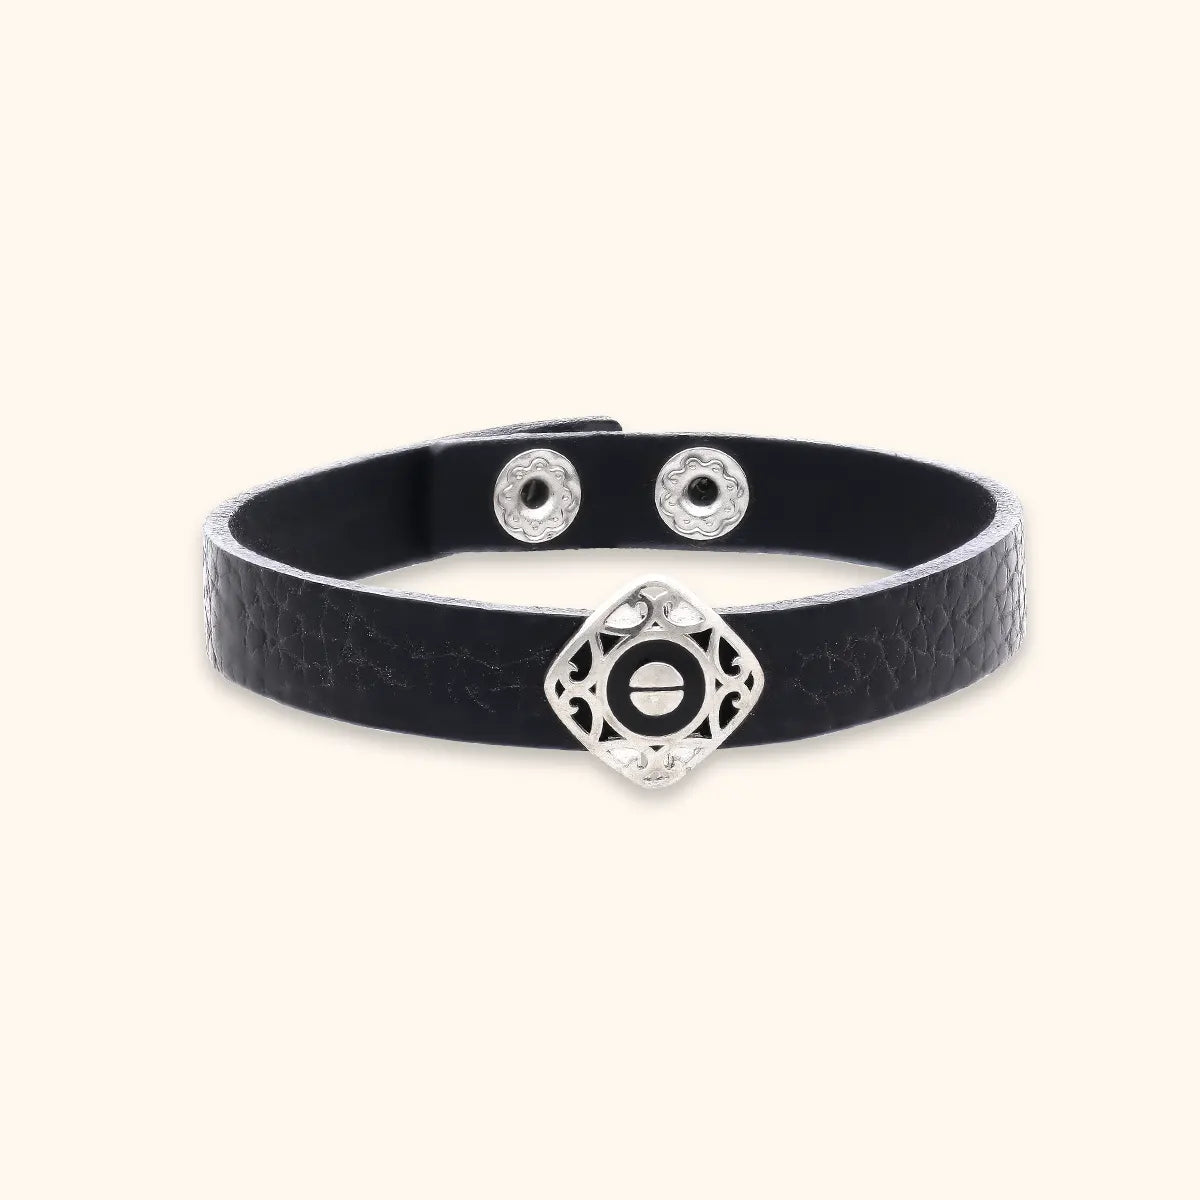 Men's Personalized Beaded Leather Bracelet with Magnetic Clasp - Black,  Men's Jewish Jewelry | Judaica Web Store